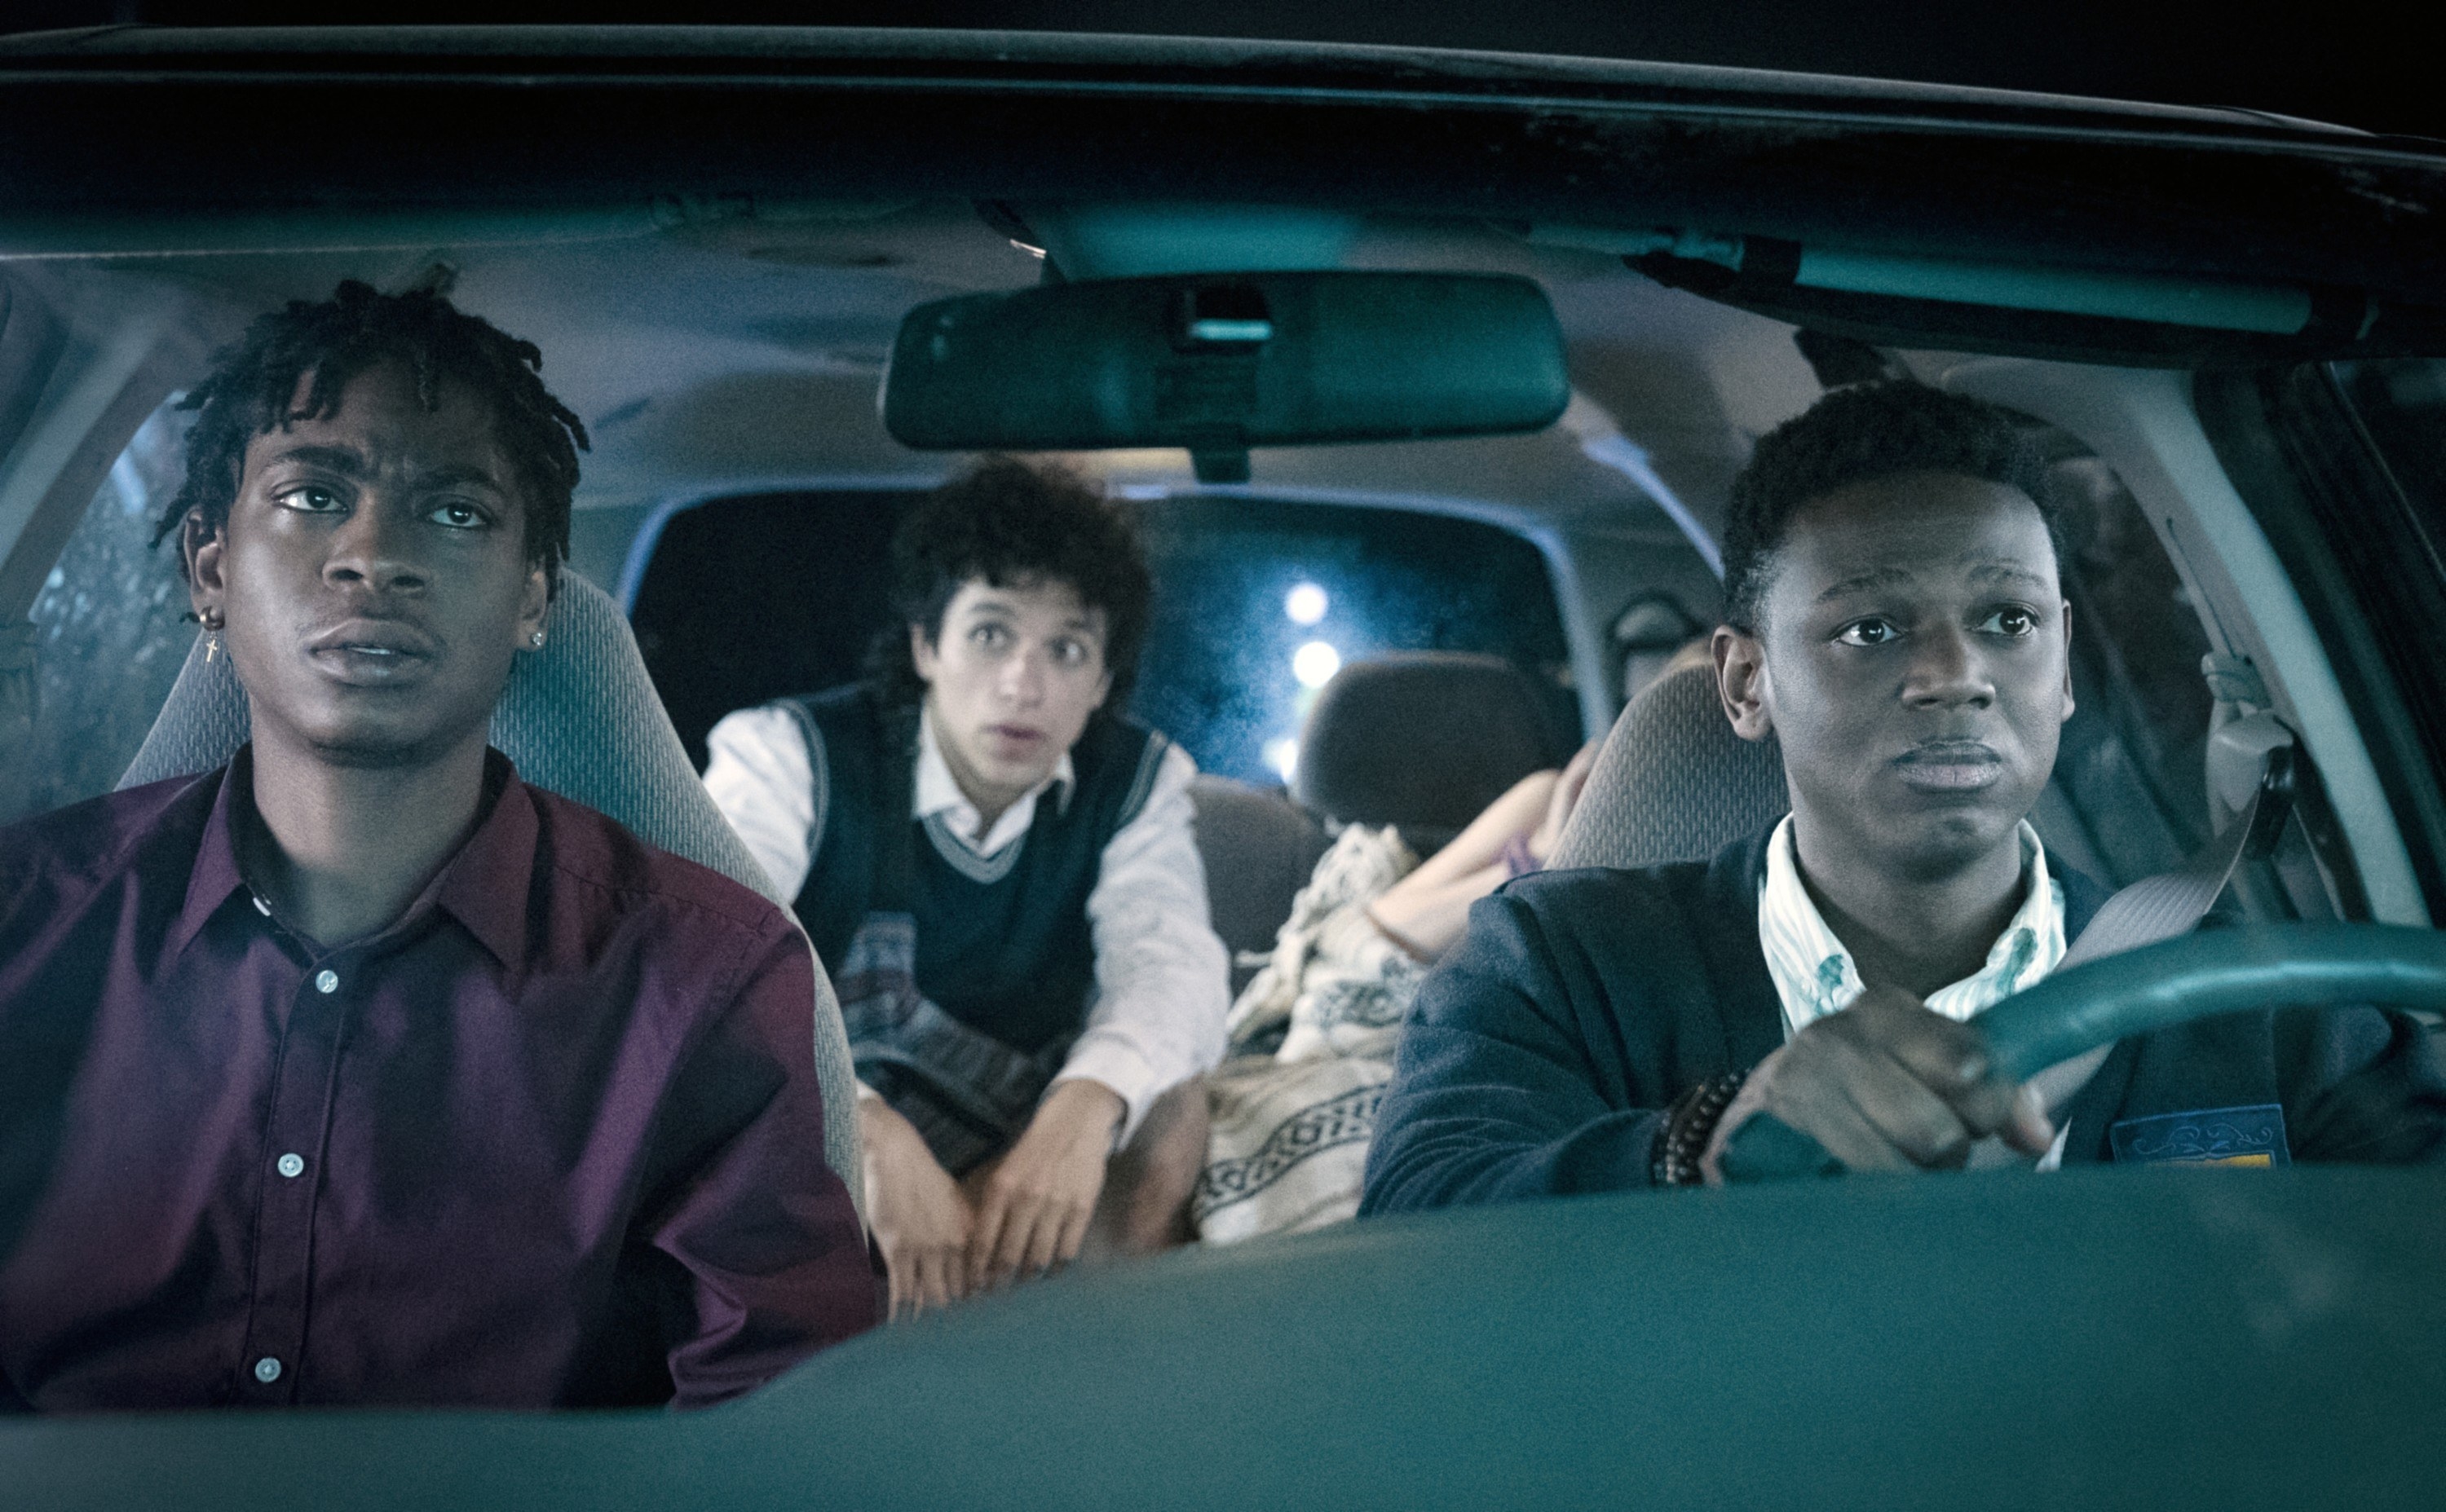 RJ Cyler, Sebastian Chacon, and Donald Elise Watkins drive in a car